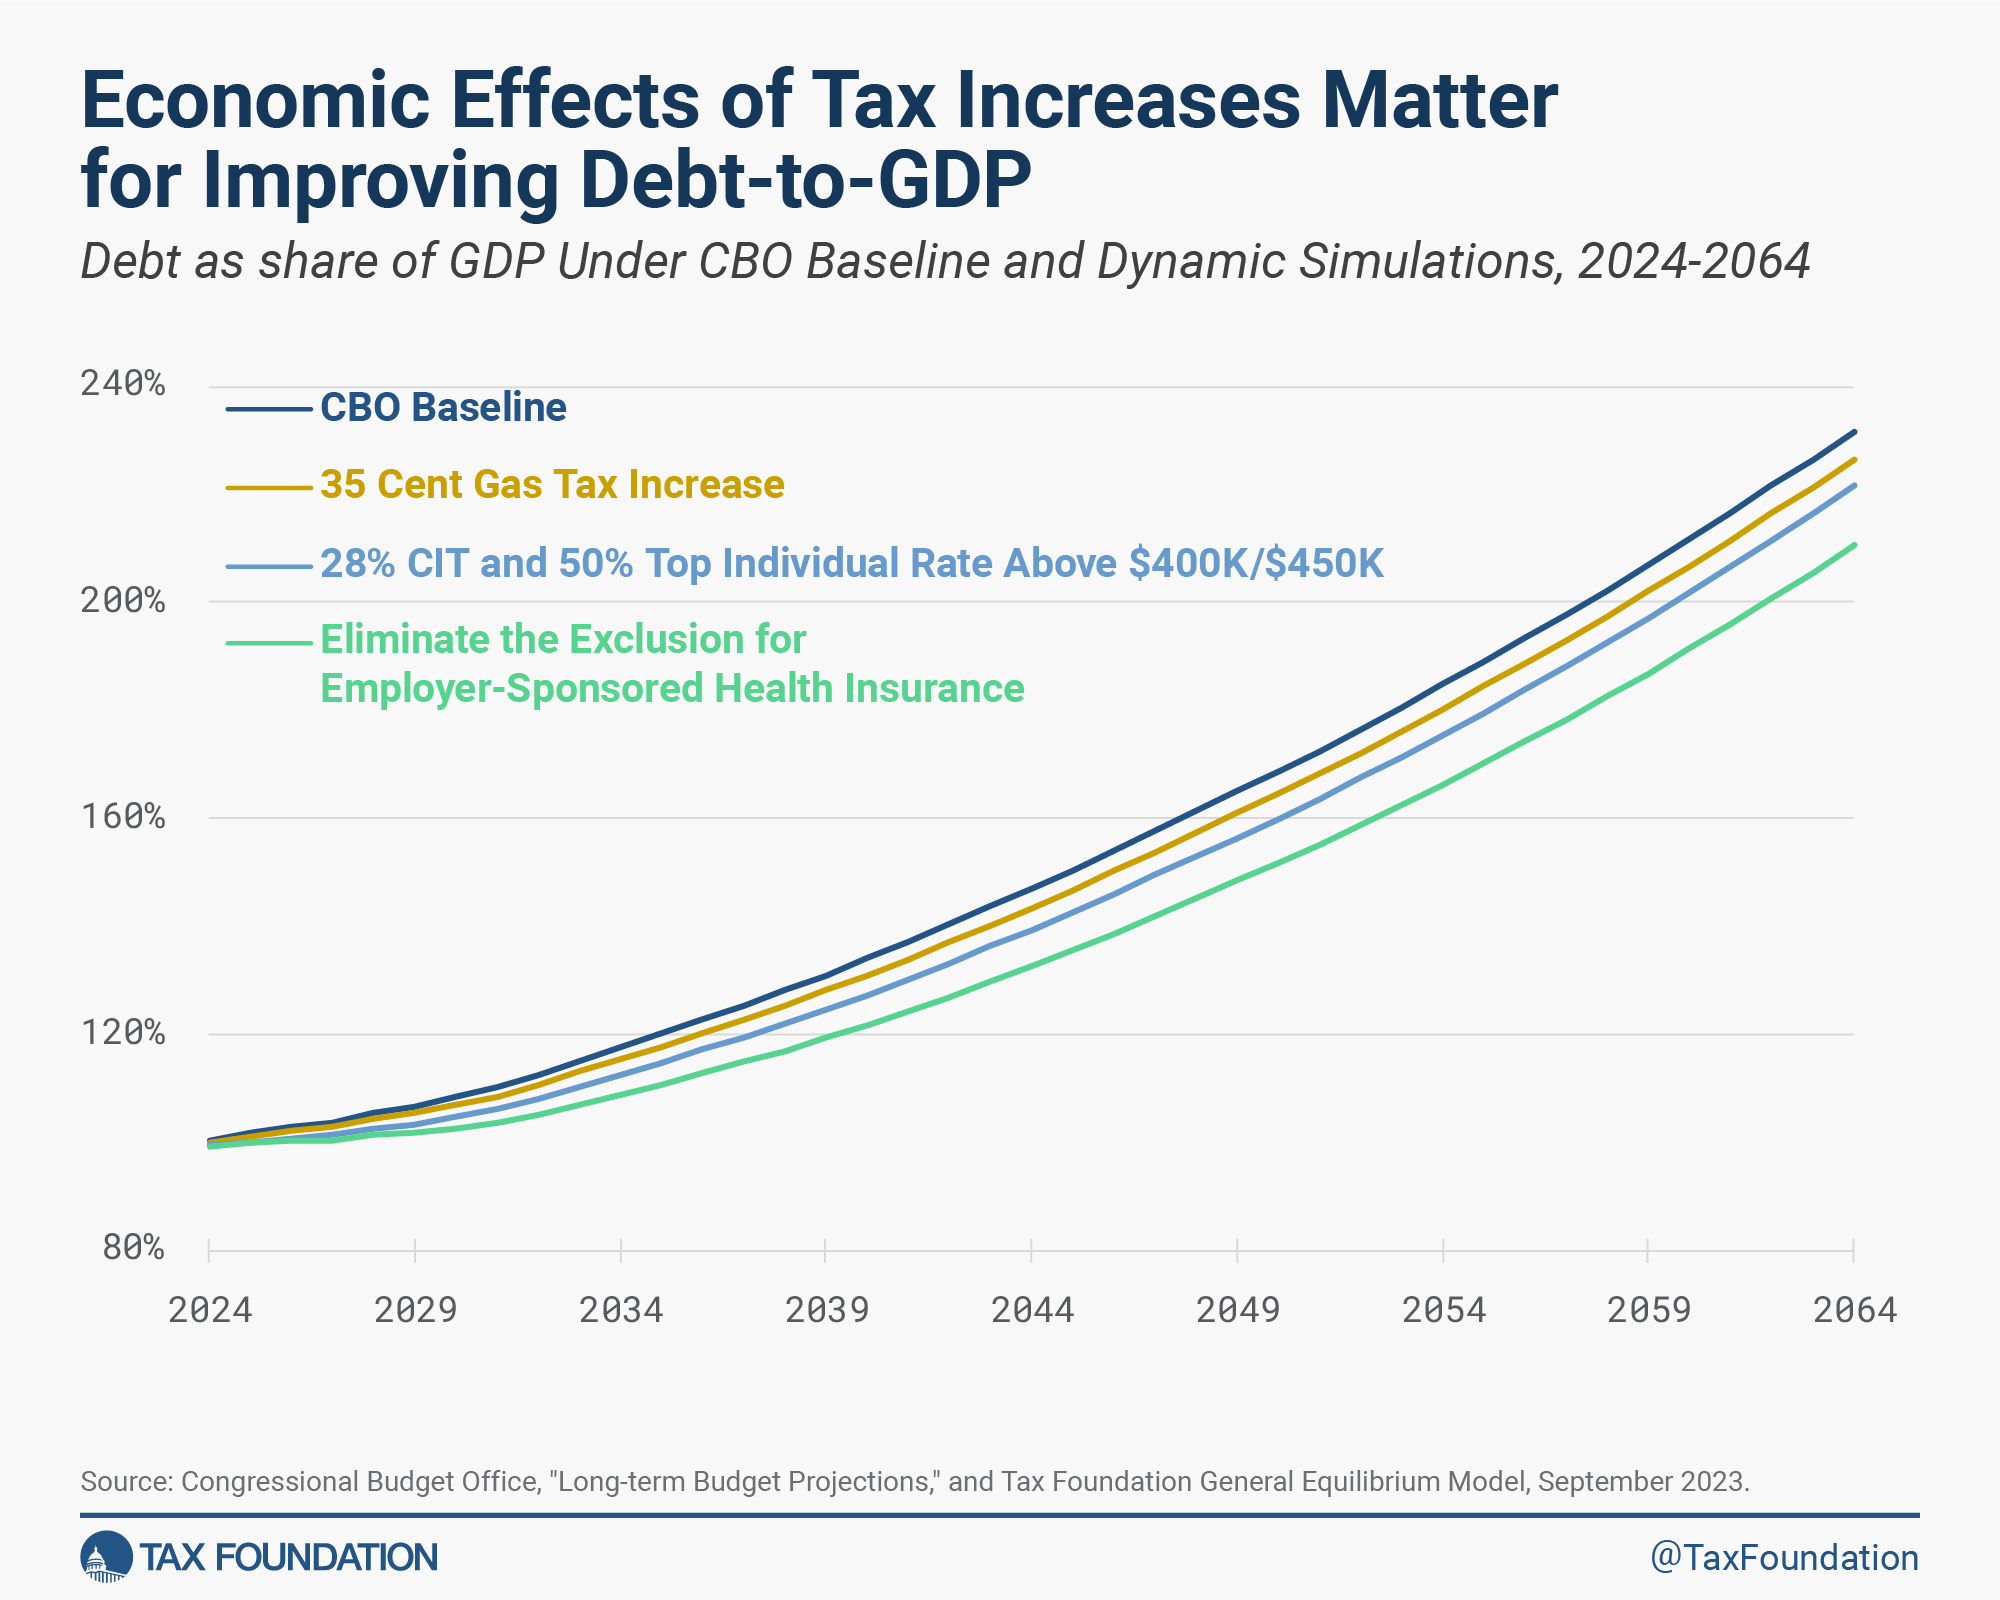 Economic effects of US tax increases matter for improving US debt to GDP ratio